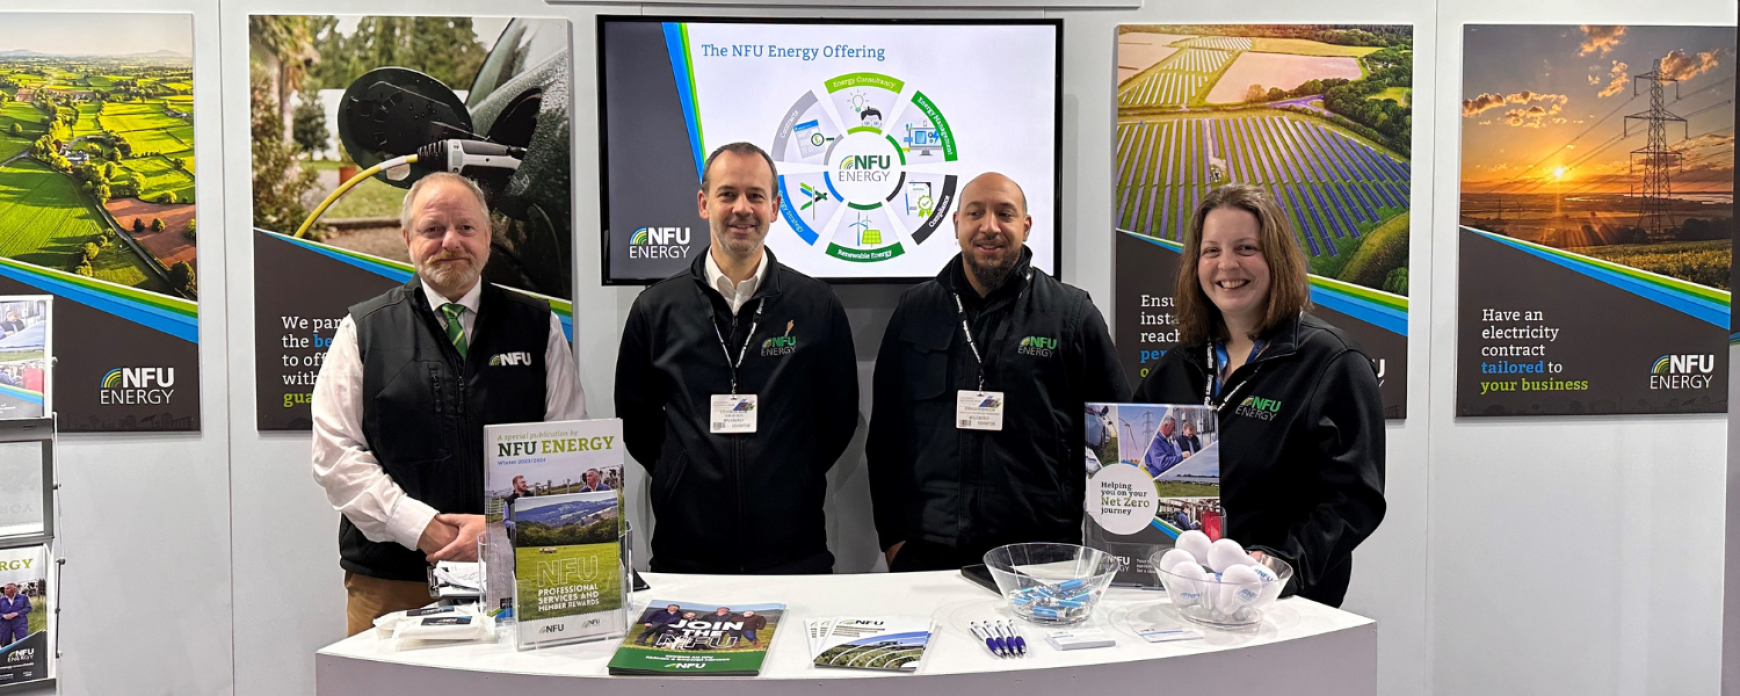 NFU Energy's stand at the Low Carbon Agriculture Show